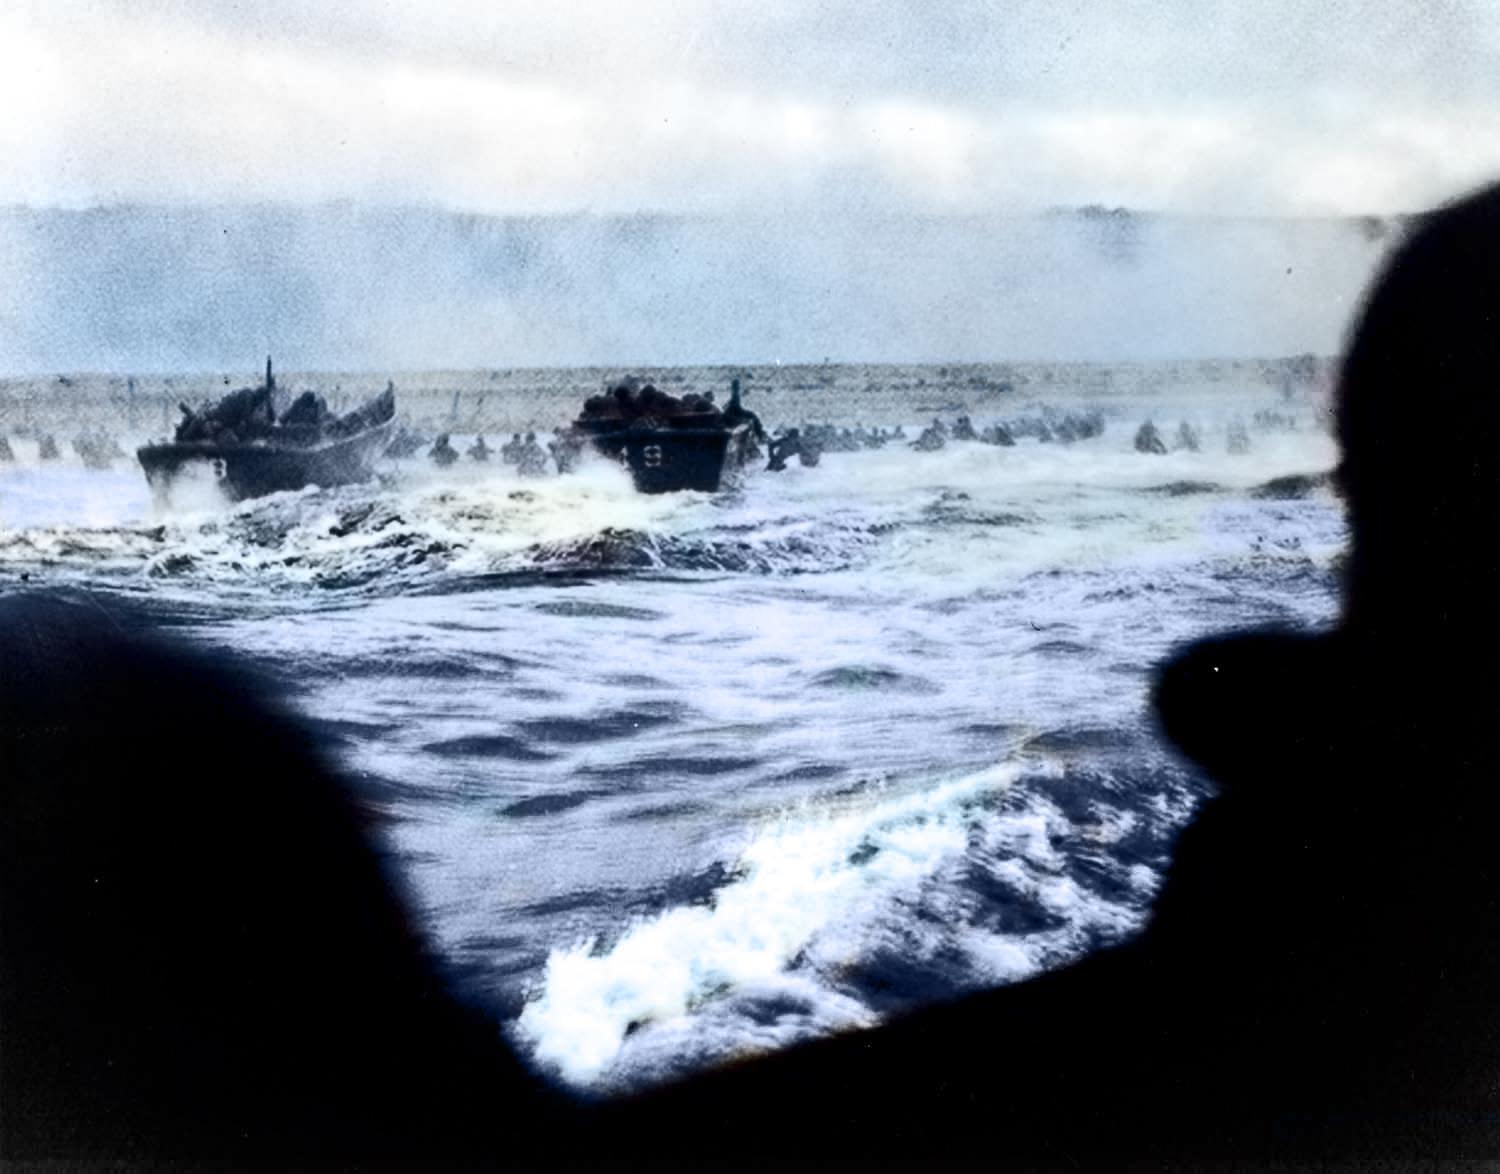 [Colorized] The Storming of Omaha Beach taken from a rare glimpse on one of the LCVPs depicts the troops pushing out of the wave. Troops taking heavy fire as soon as the doors drop can be seen jumping over the sides. June 6th, 1944.